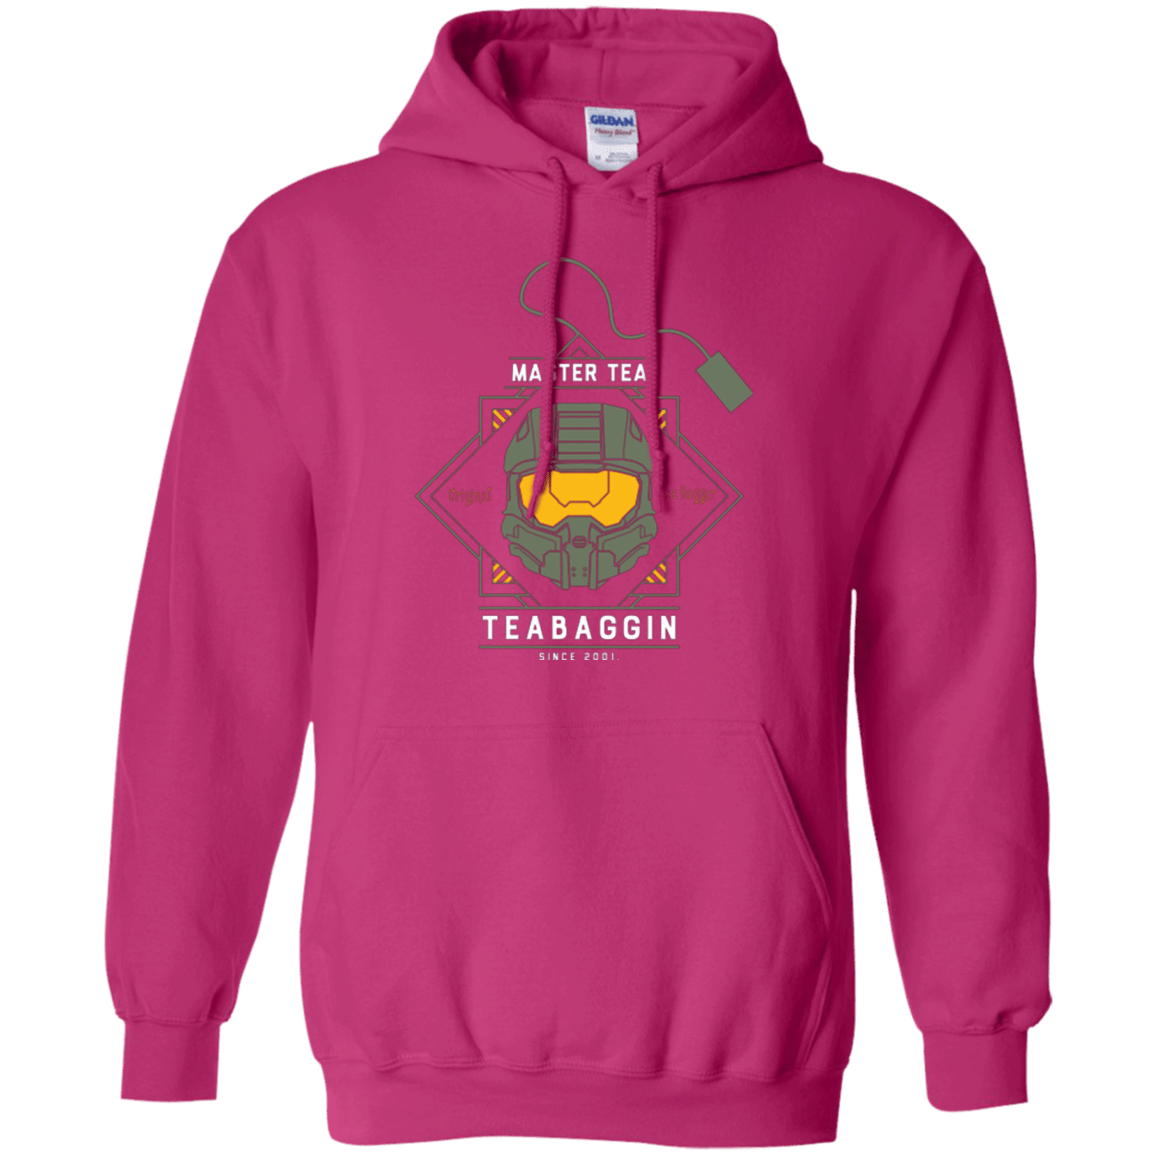 Sweatshirts Heliconia / Small Master Tea - The Original Halo Teabagger Pullover Hoodie